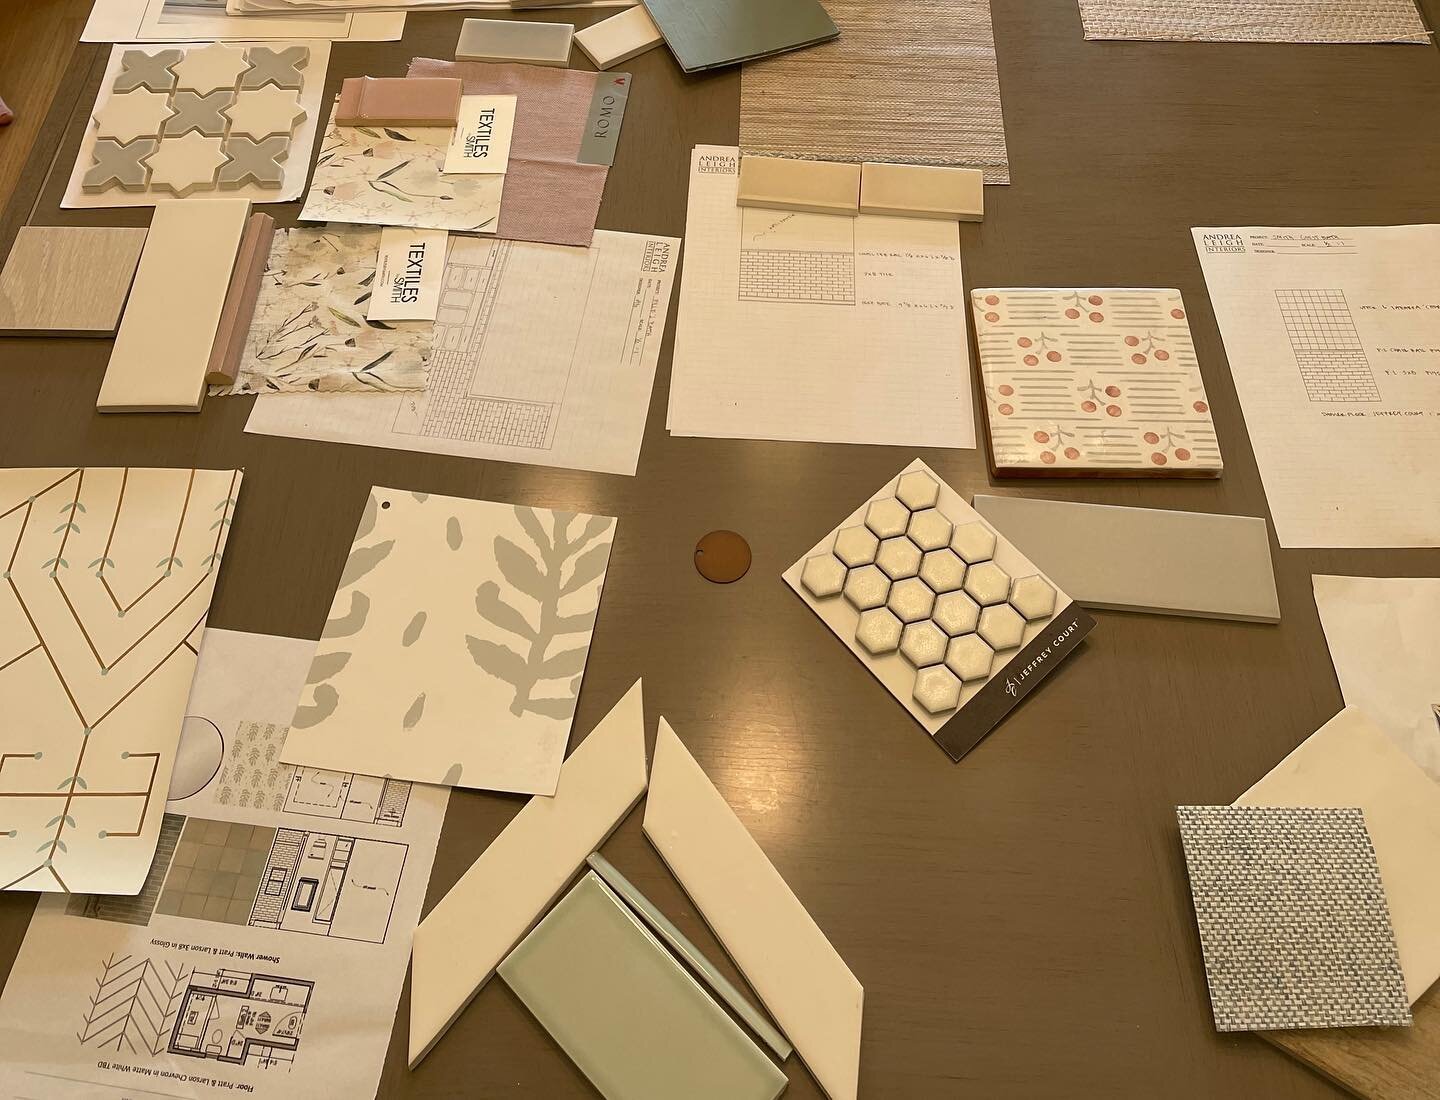 Can&rsquo;t wait to see these beautiful selections come to life in our fabulous westlake custom home!  Love when inspirations become reality.  Happy Easter Austin!  #787designstudio #andrealeighinteriors #annsacks_atx #jeffreycourtinc #textilesbysmit